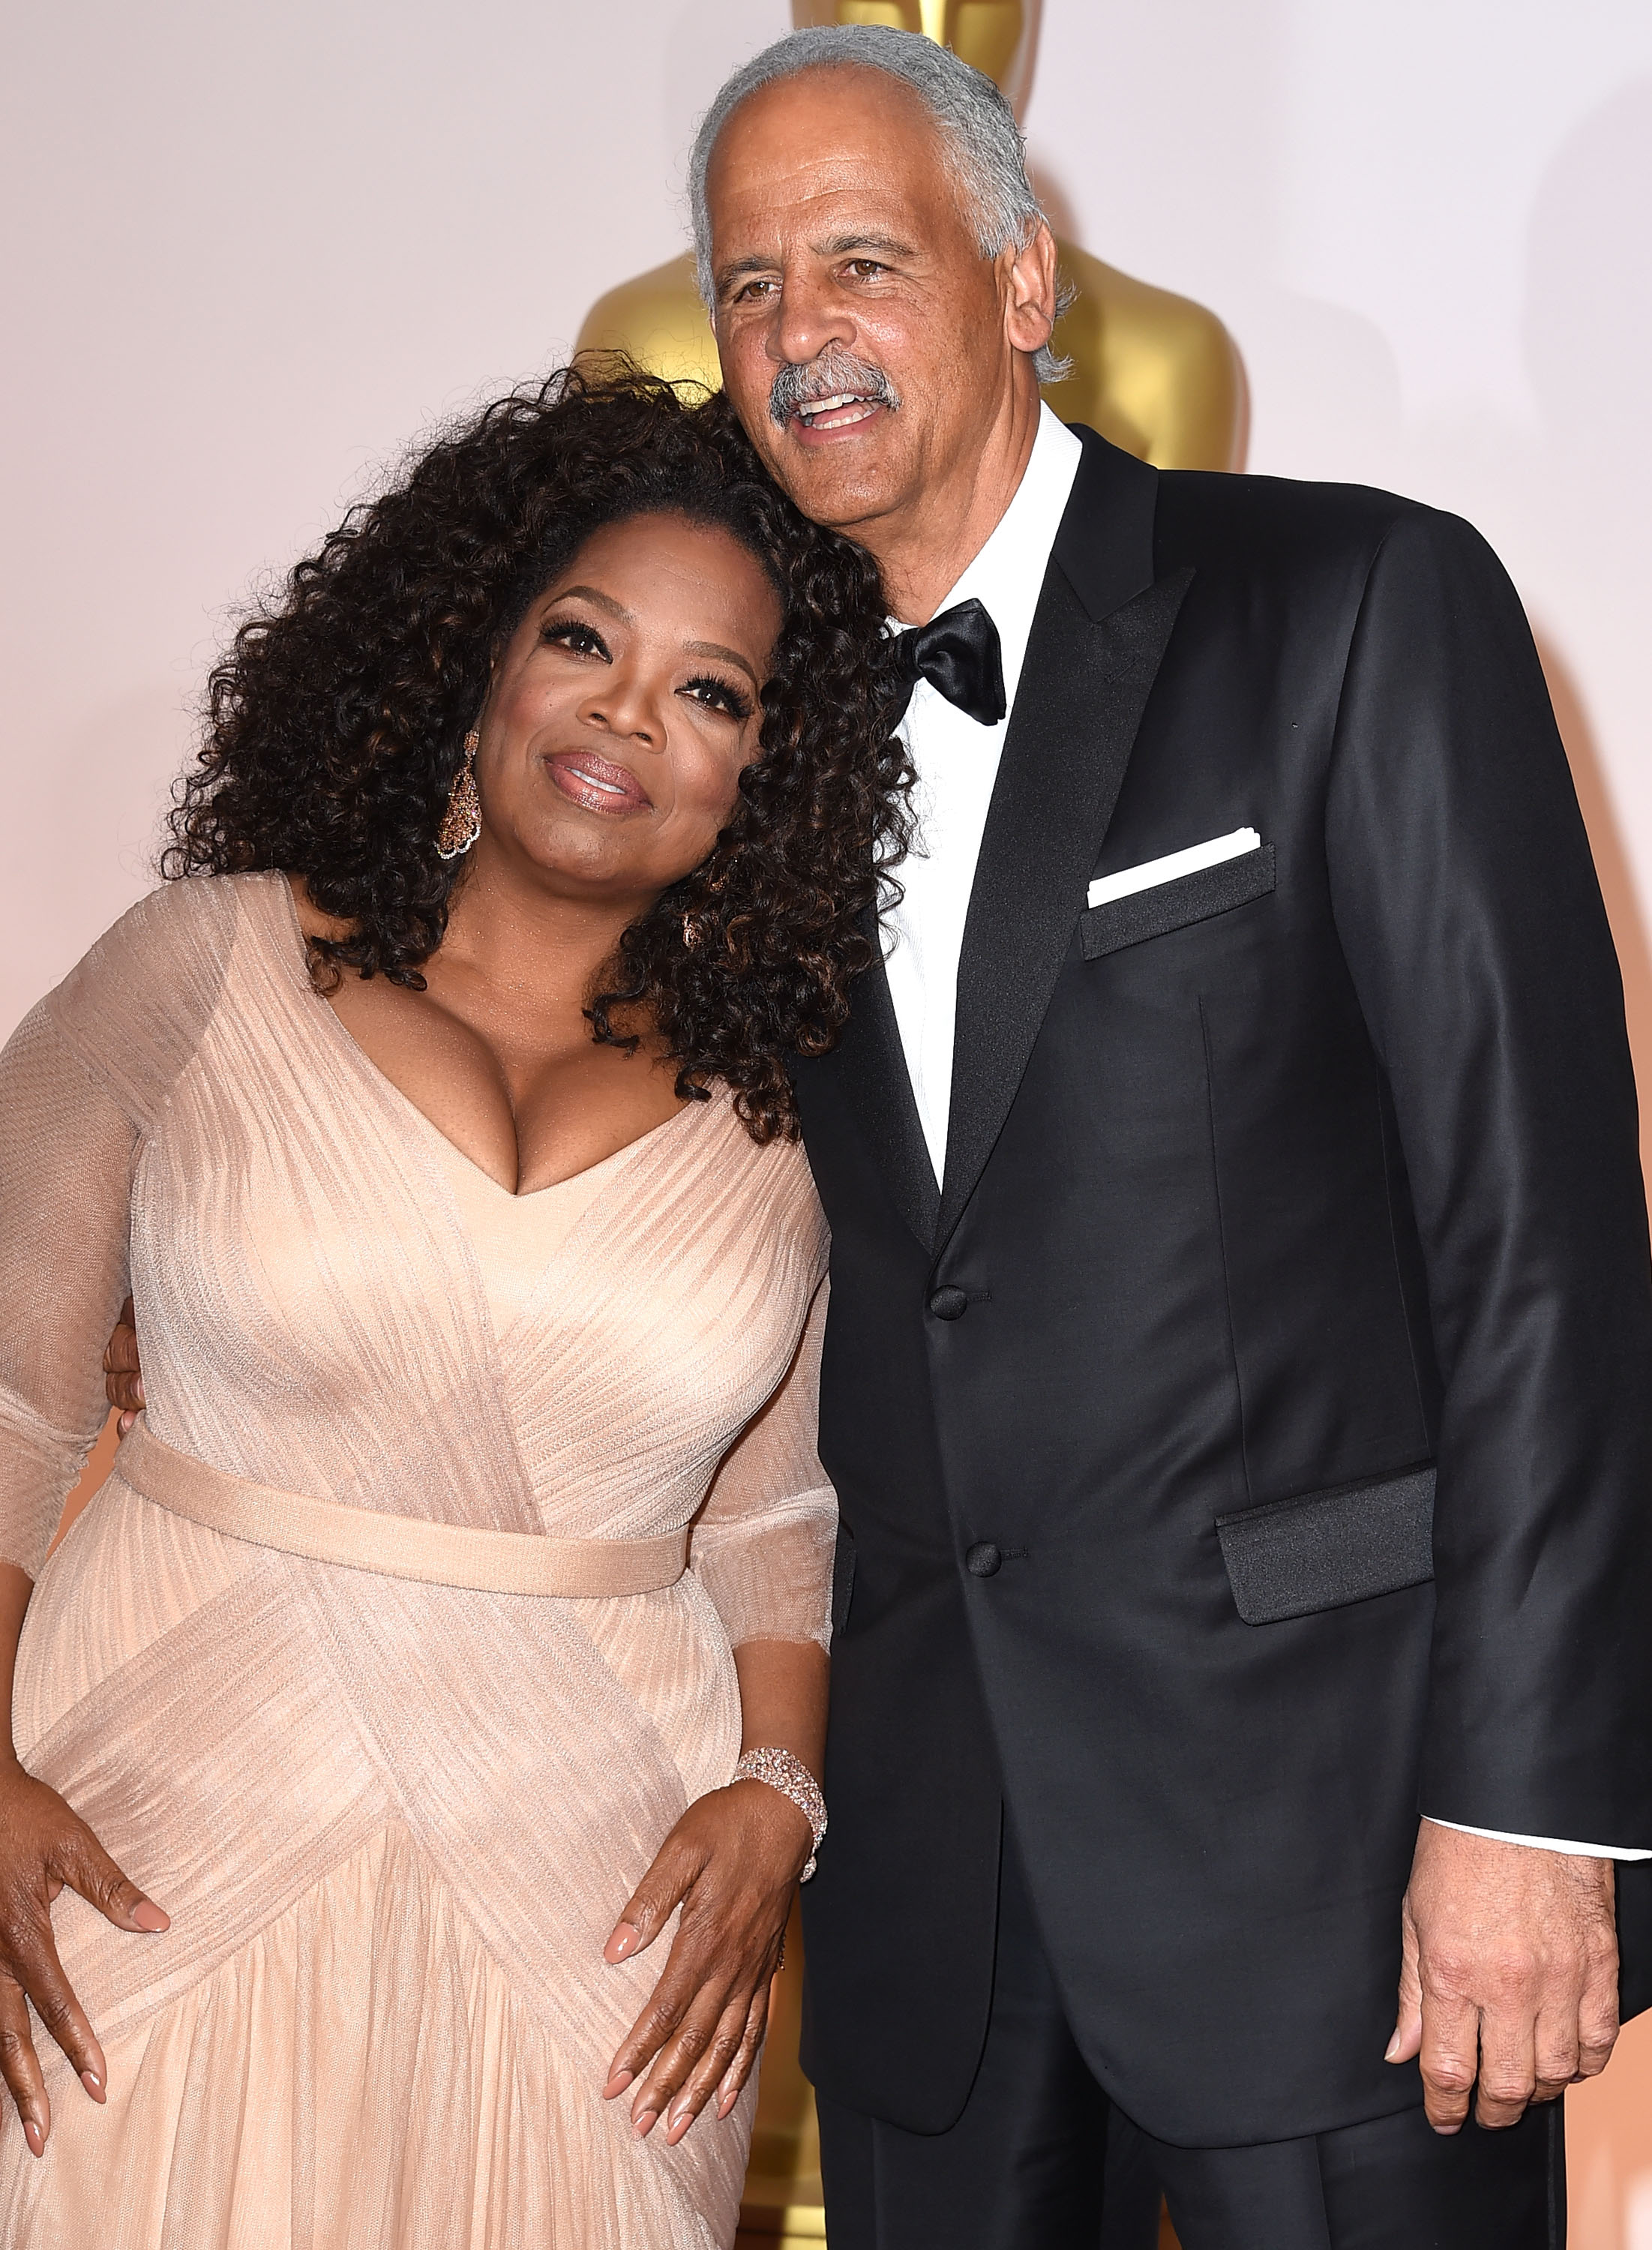 Oprah Winfrey and Stedman Graham in Hollywood, California on February 22, 2015 | Source: Getty Images